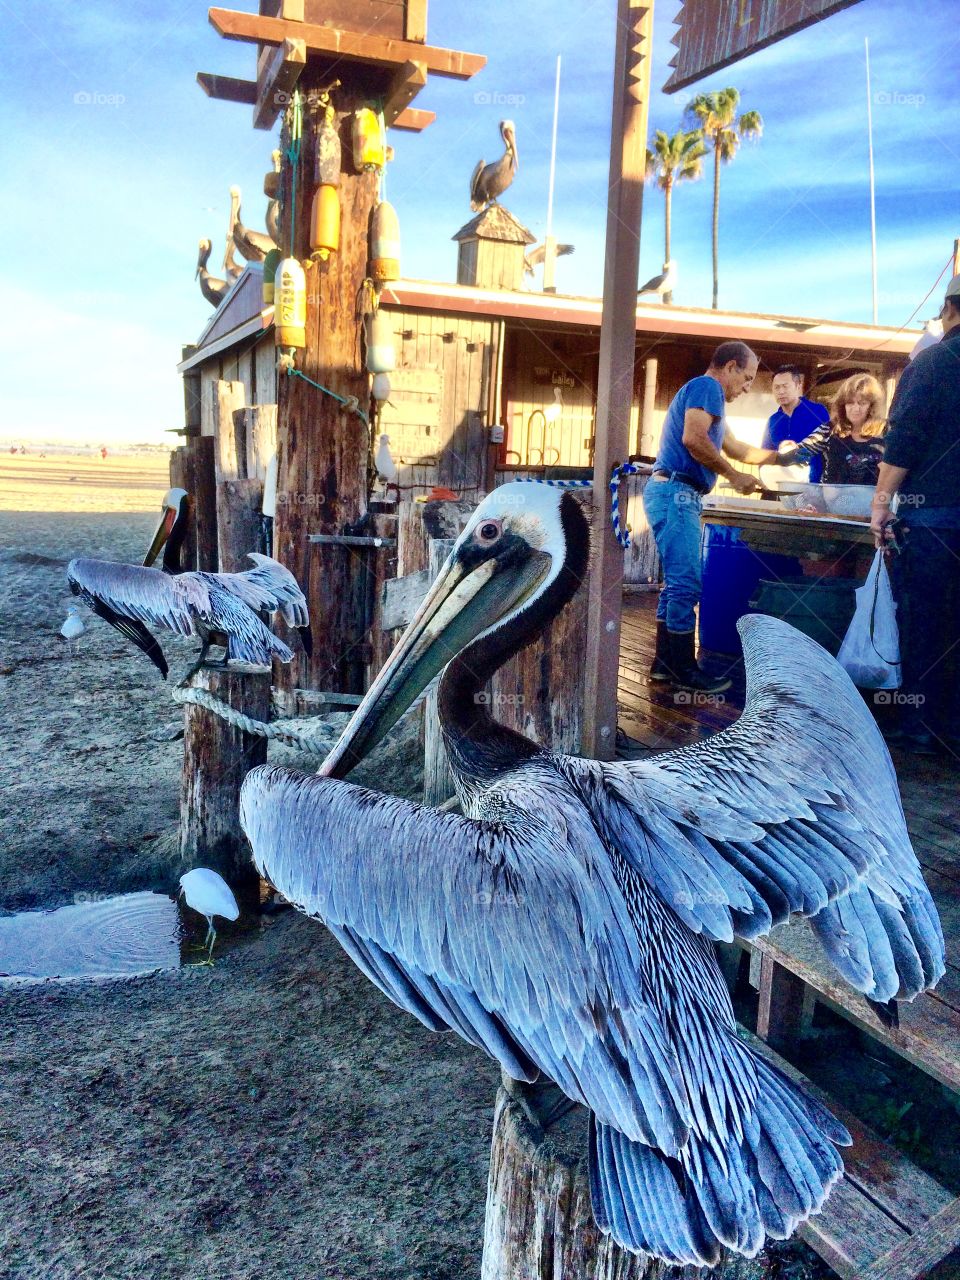 Sunrise Fish Market. Pelicans waiting their turn at the Fish Market